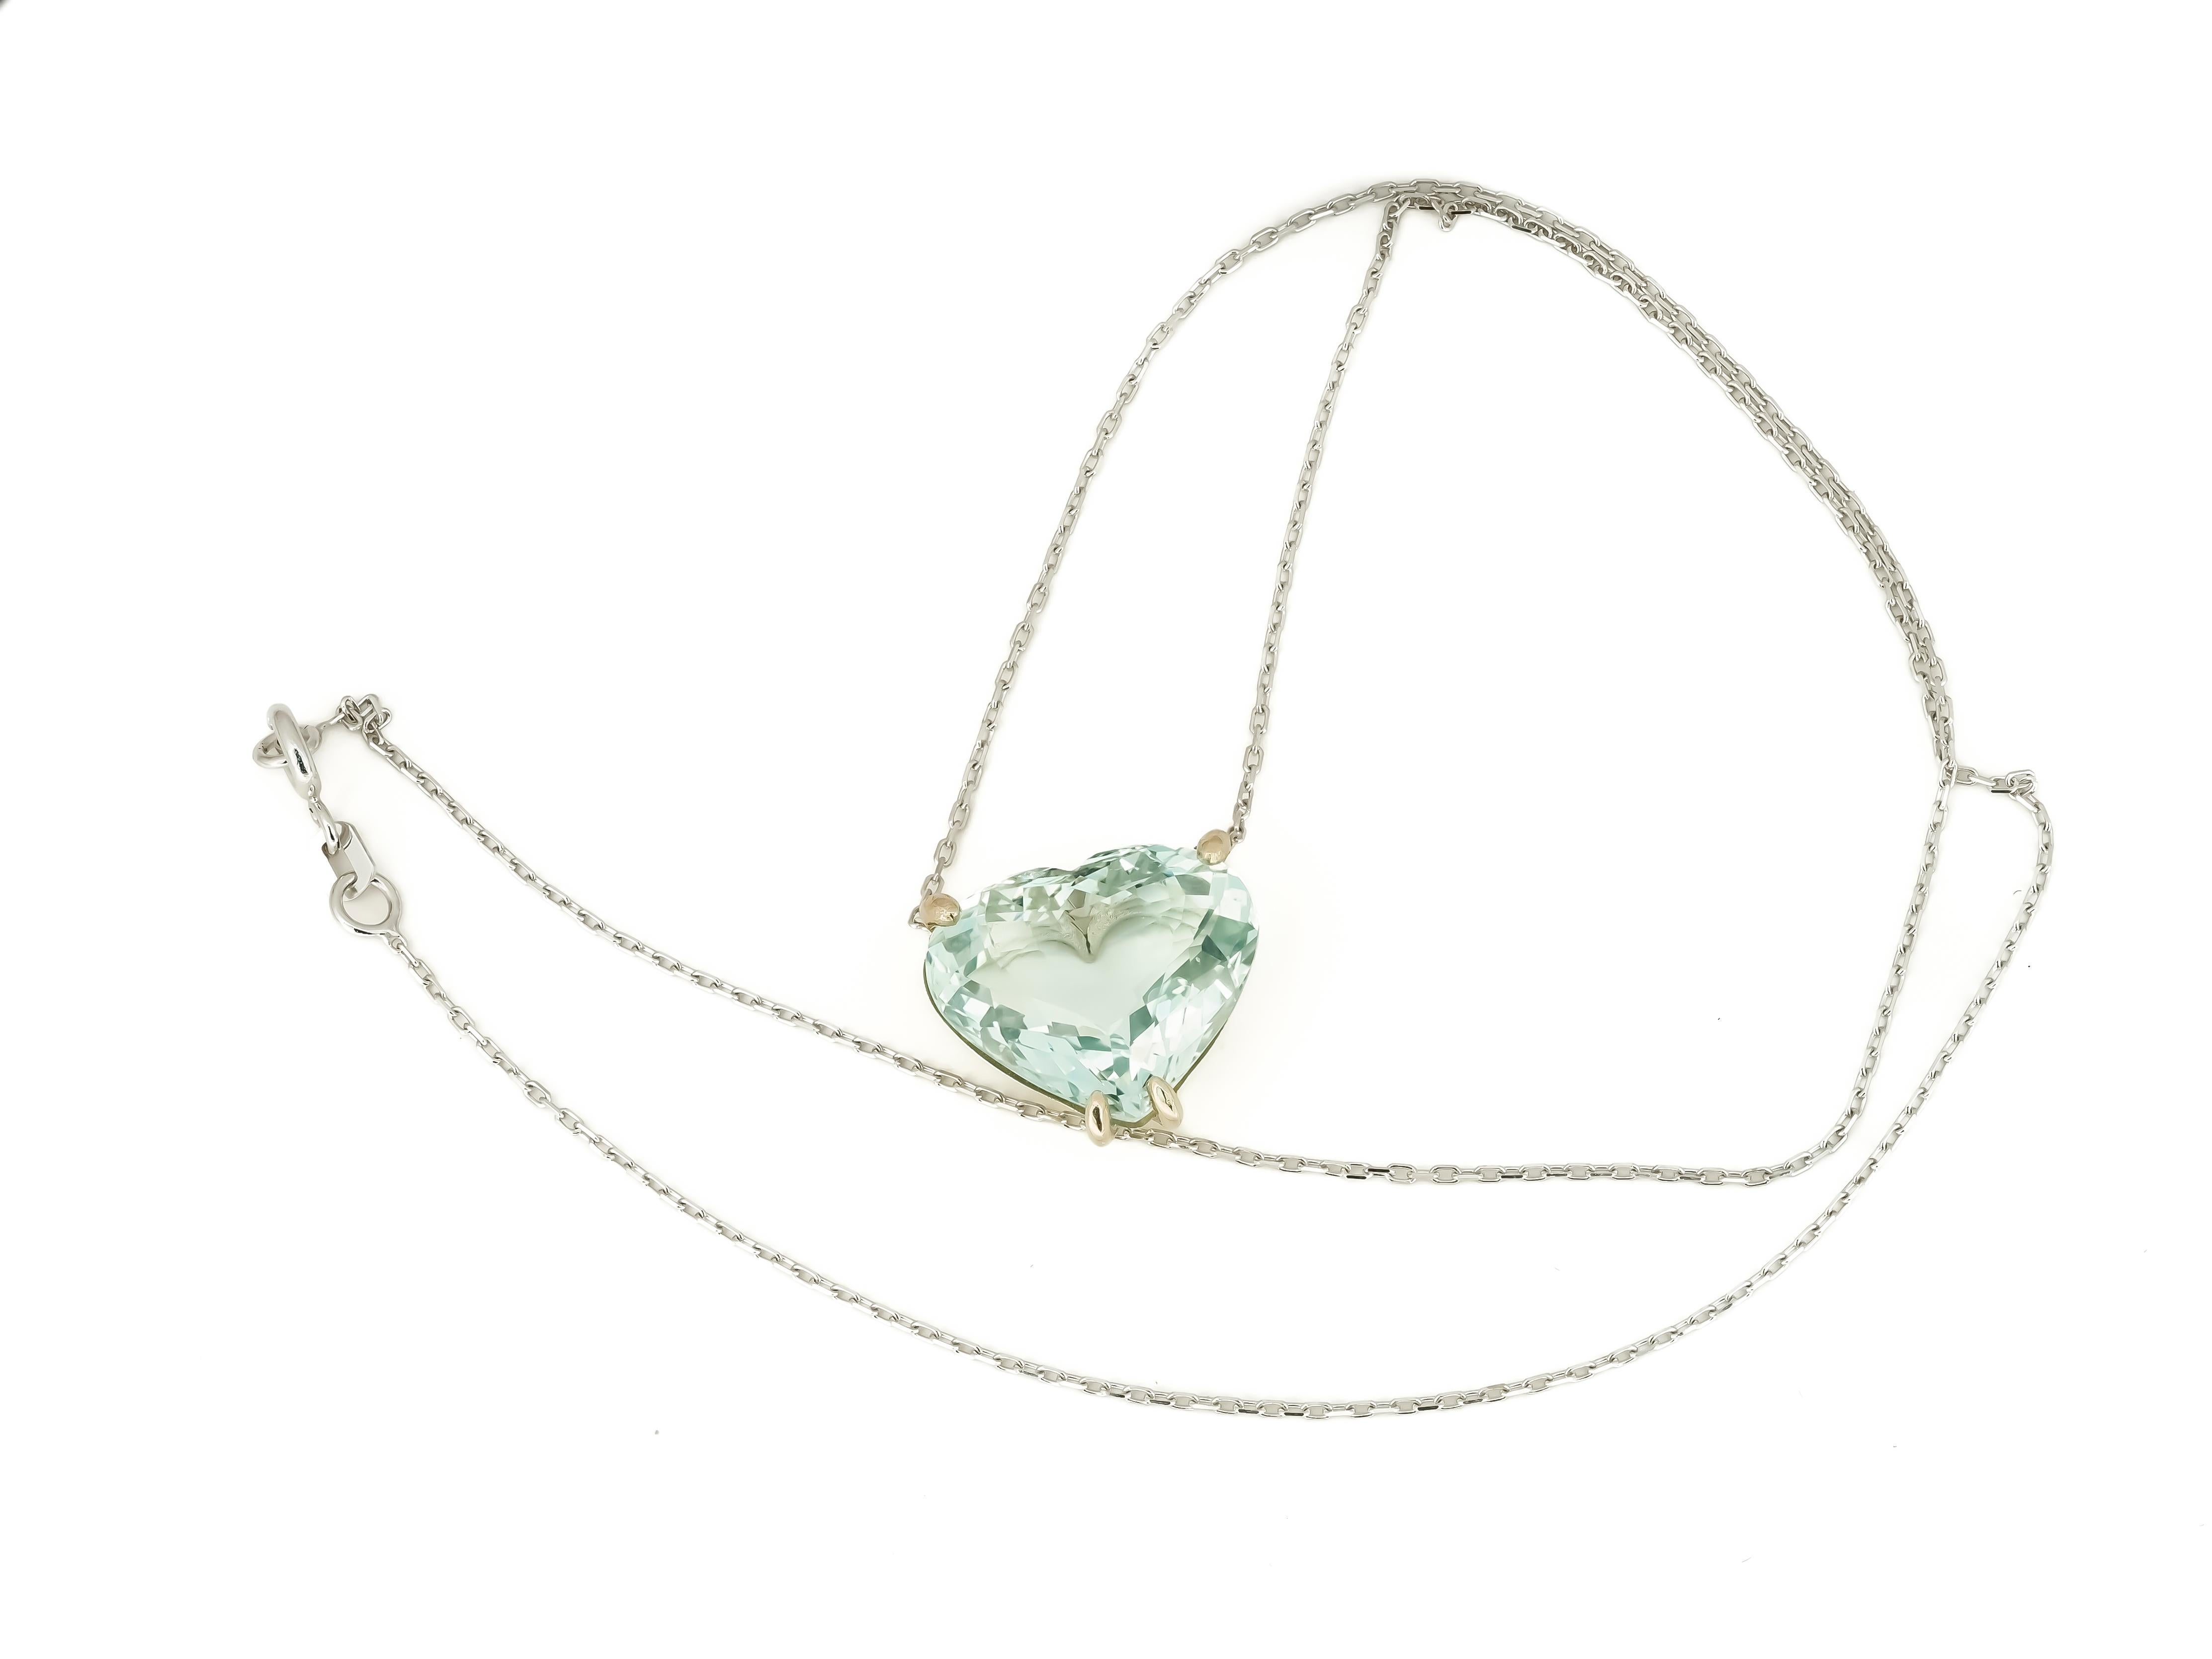 Heart Cut Heart Shaped Aquamarine Pendant Necklace in 14k White Gold